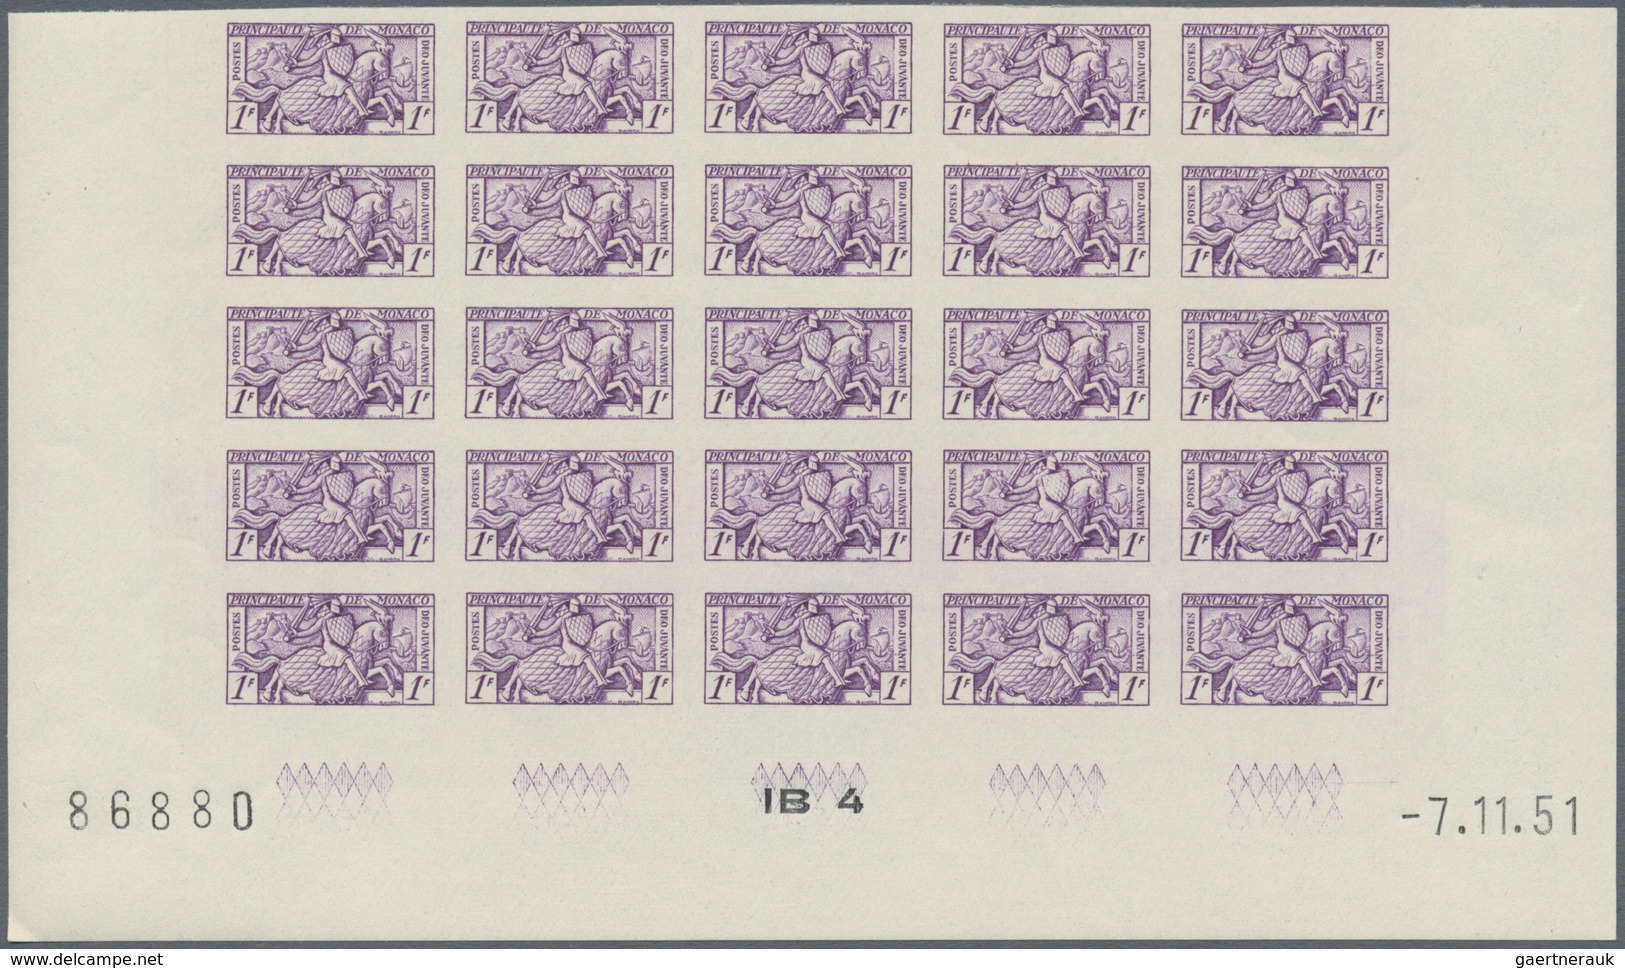 Monaco: 1951, Visiting card stamps complete set of five in IMPERFORATE blocks of 25 from lower margi